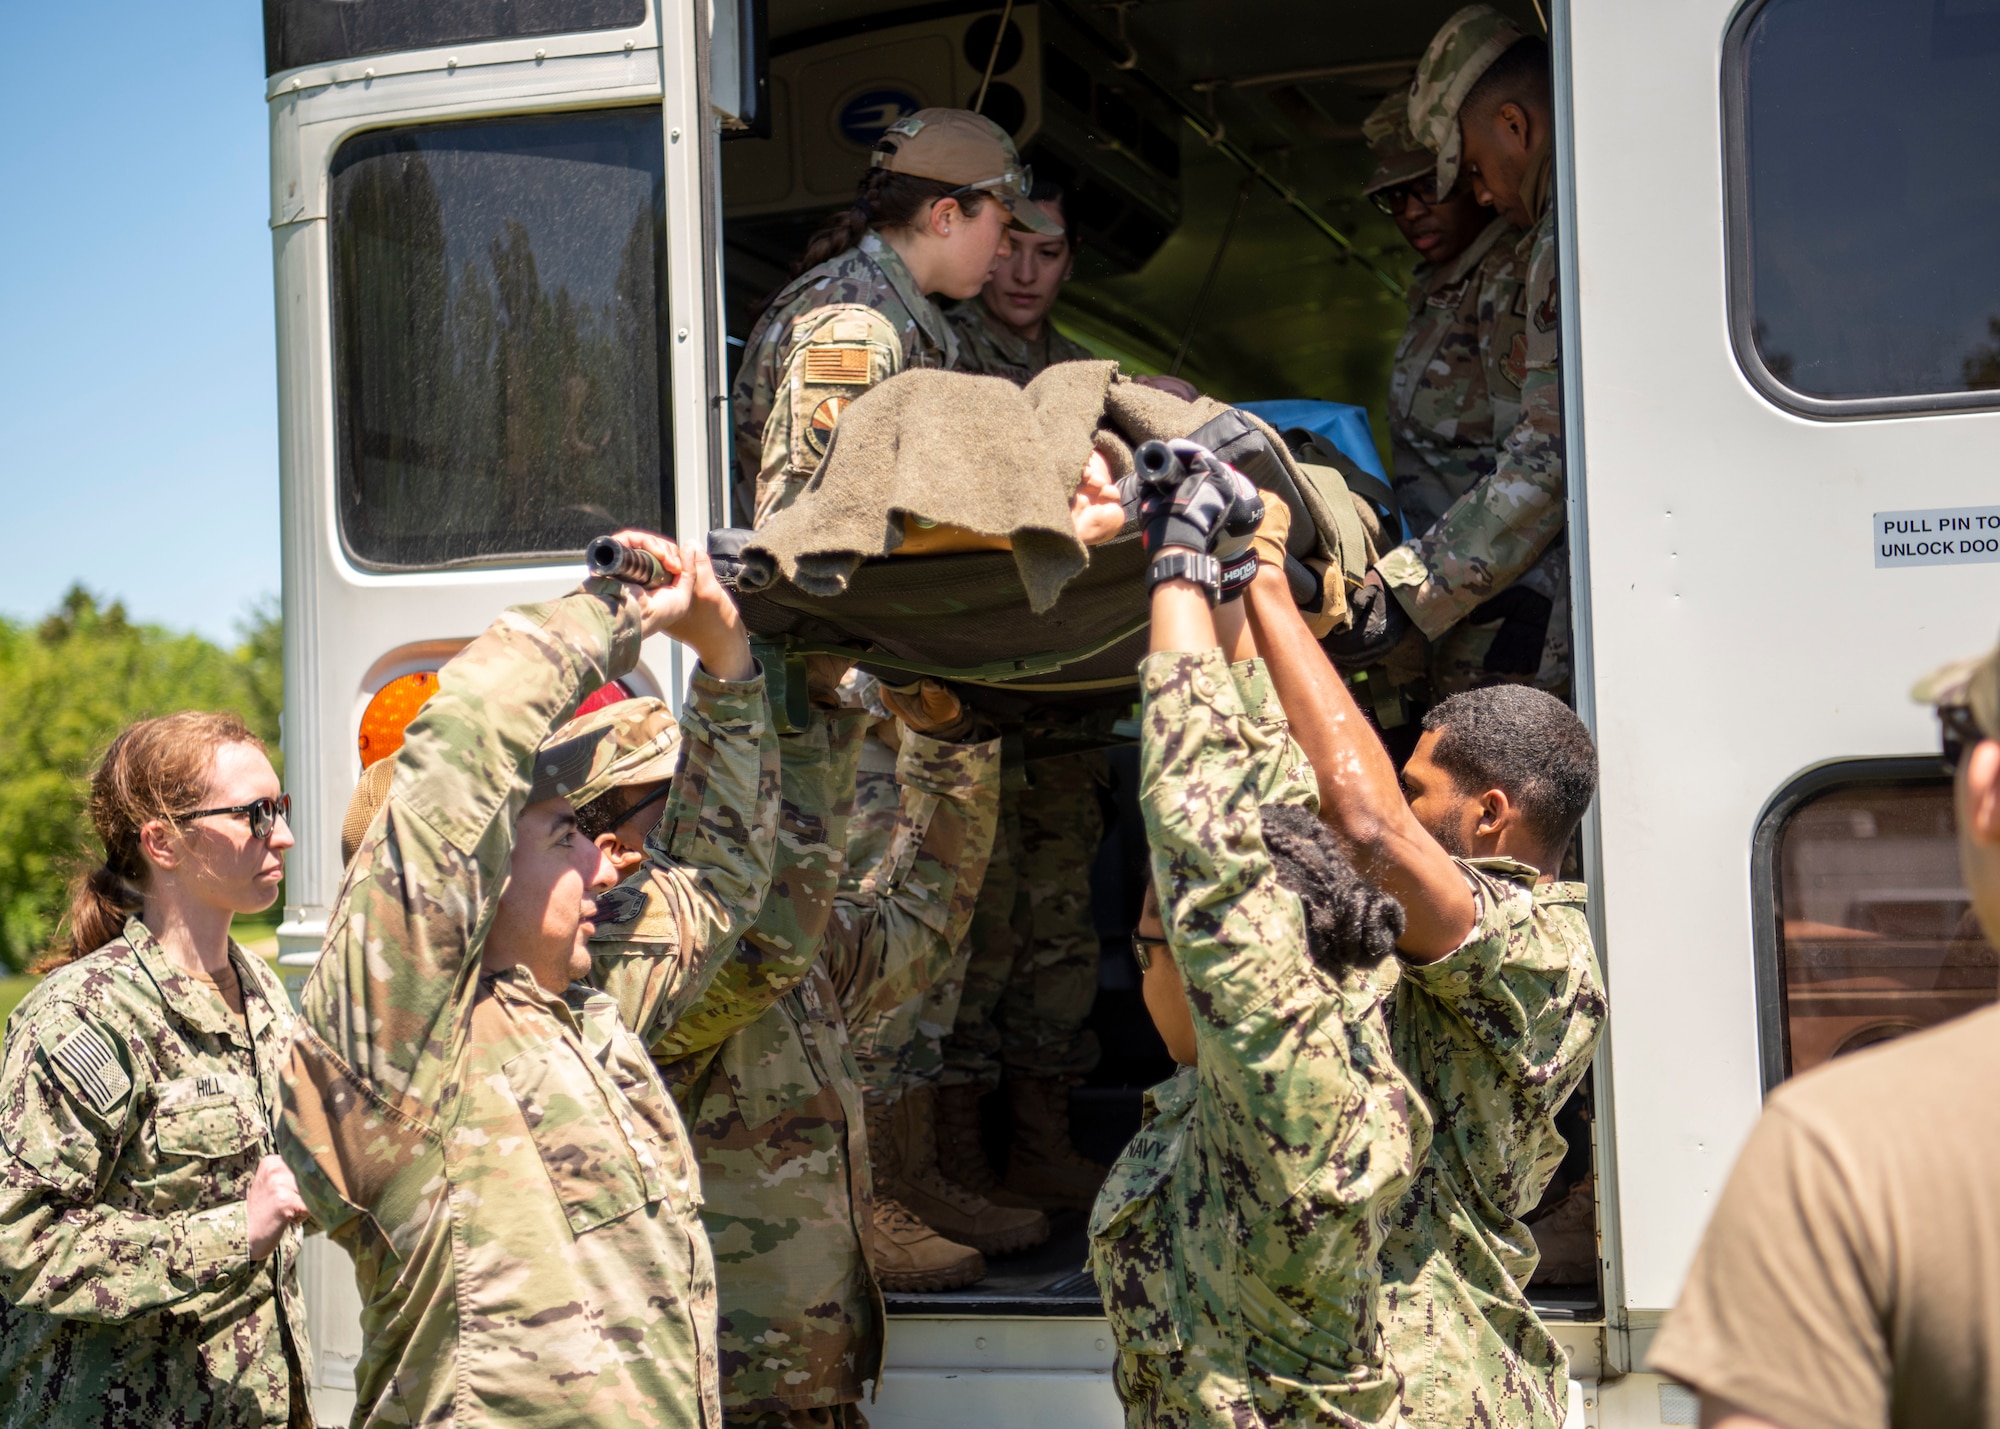 Airmen and Sailors work together to lower a gurney out of an ambulance bus during the Expeditionary Medical Support System exercise at Joint Base Andrews, Md., May 10, 2022.